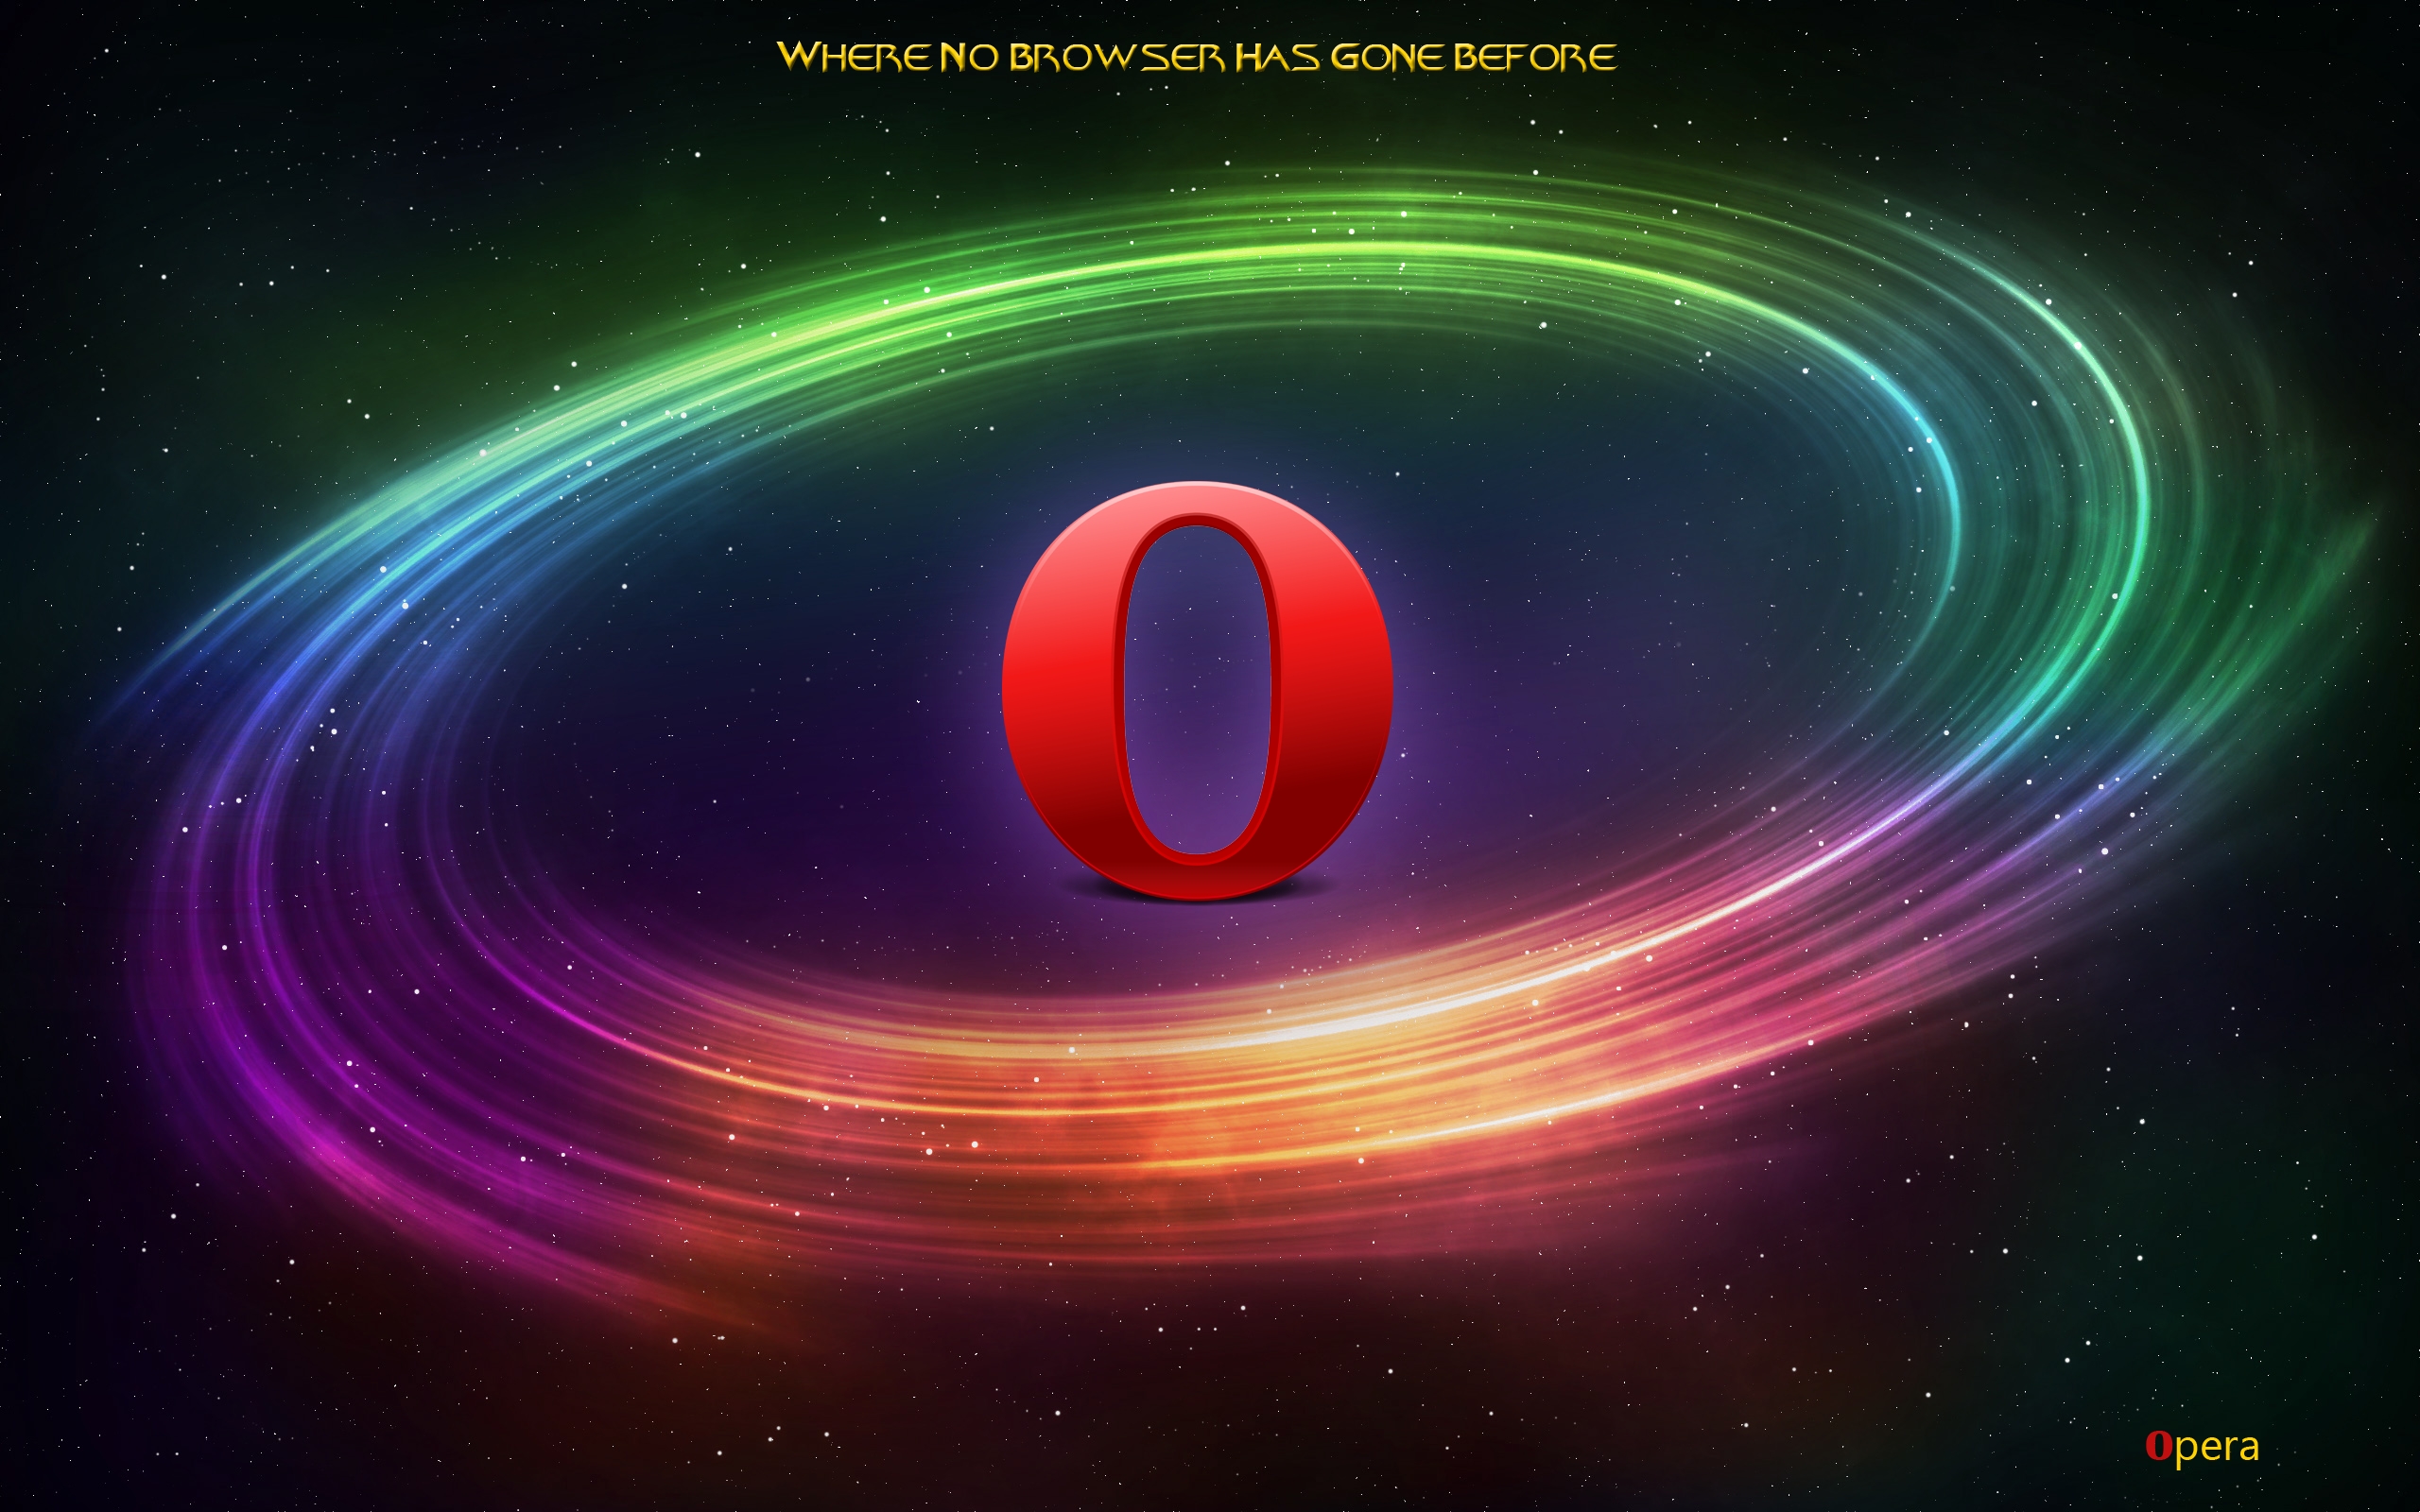 technology, opera, browser High Definition image